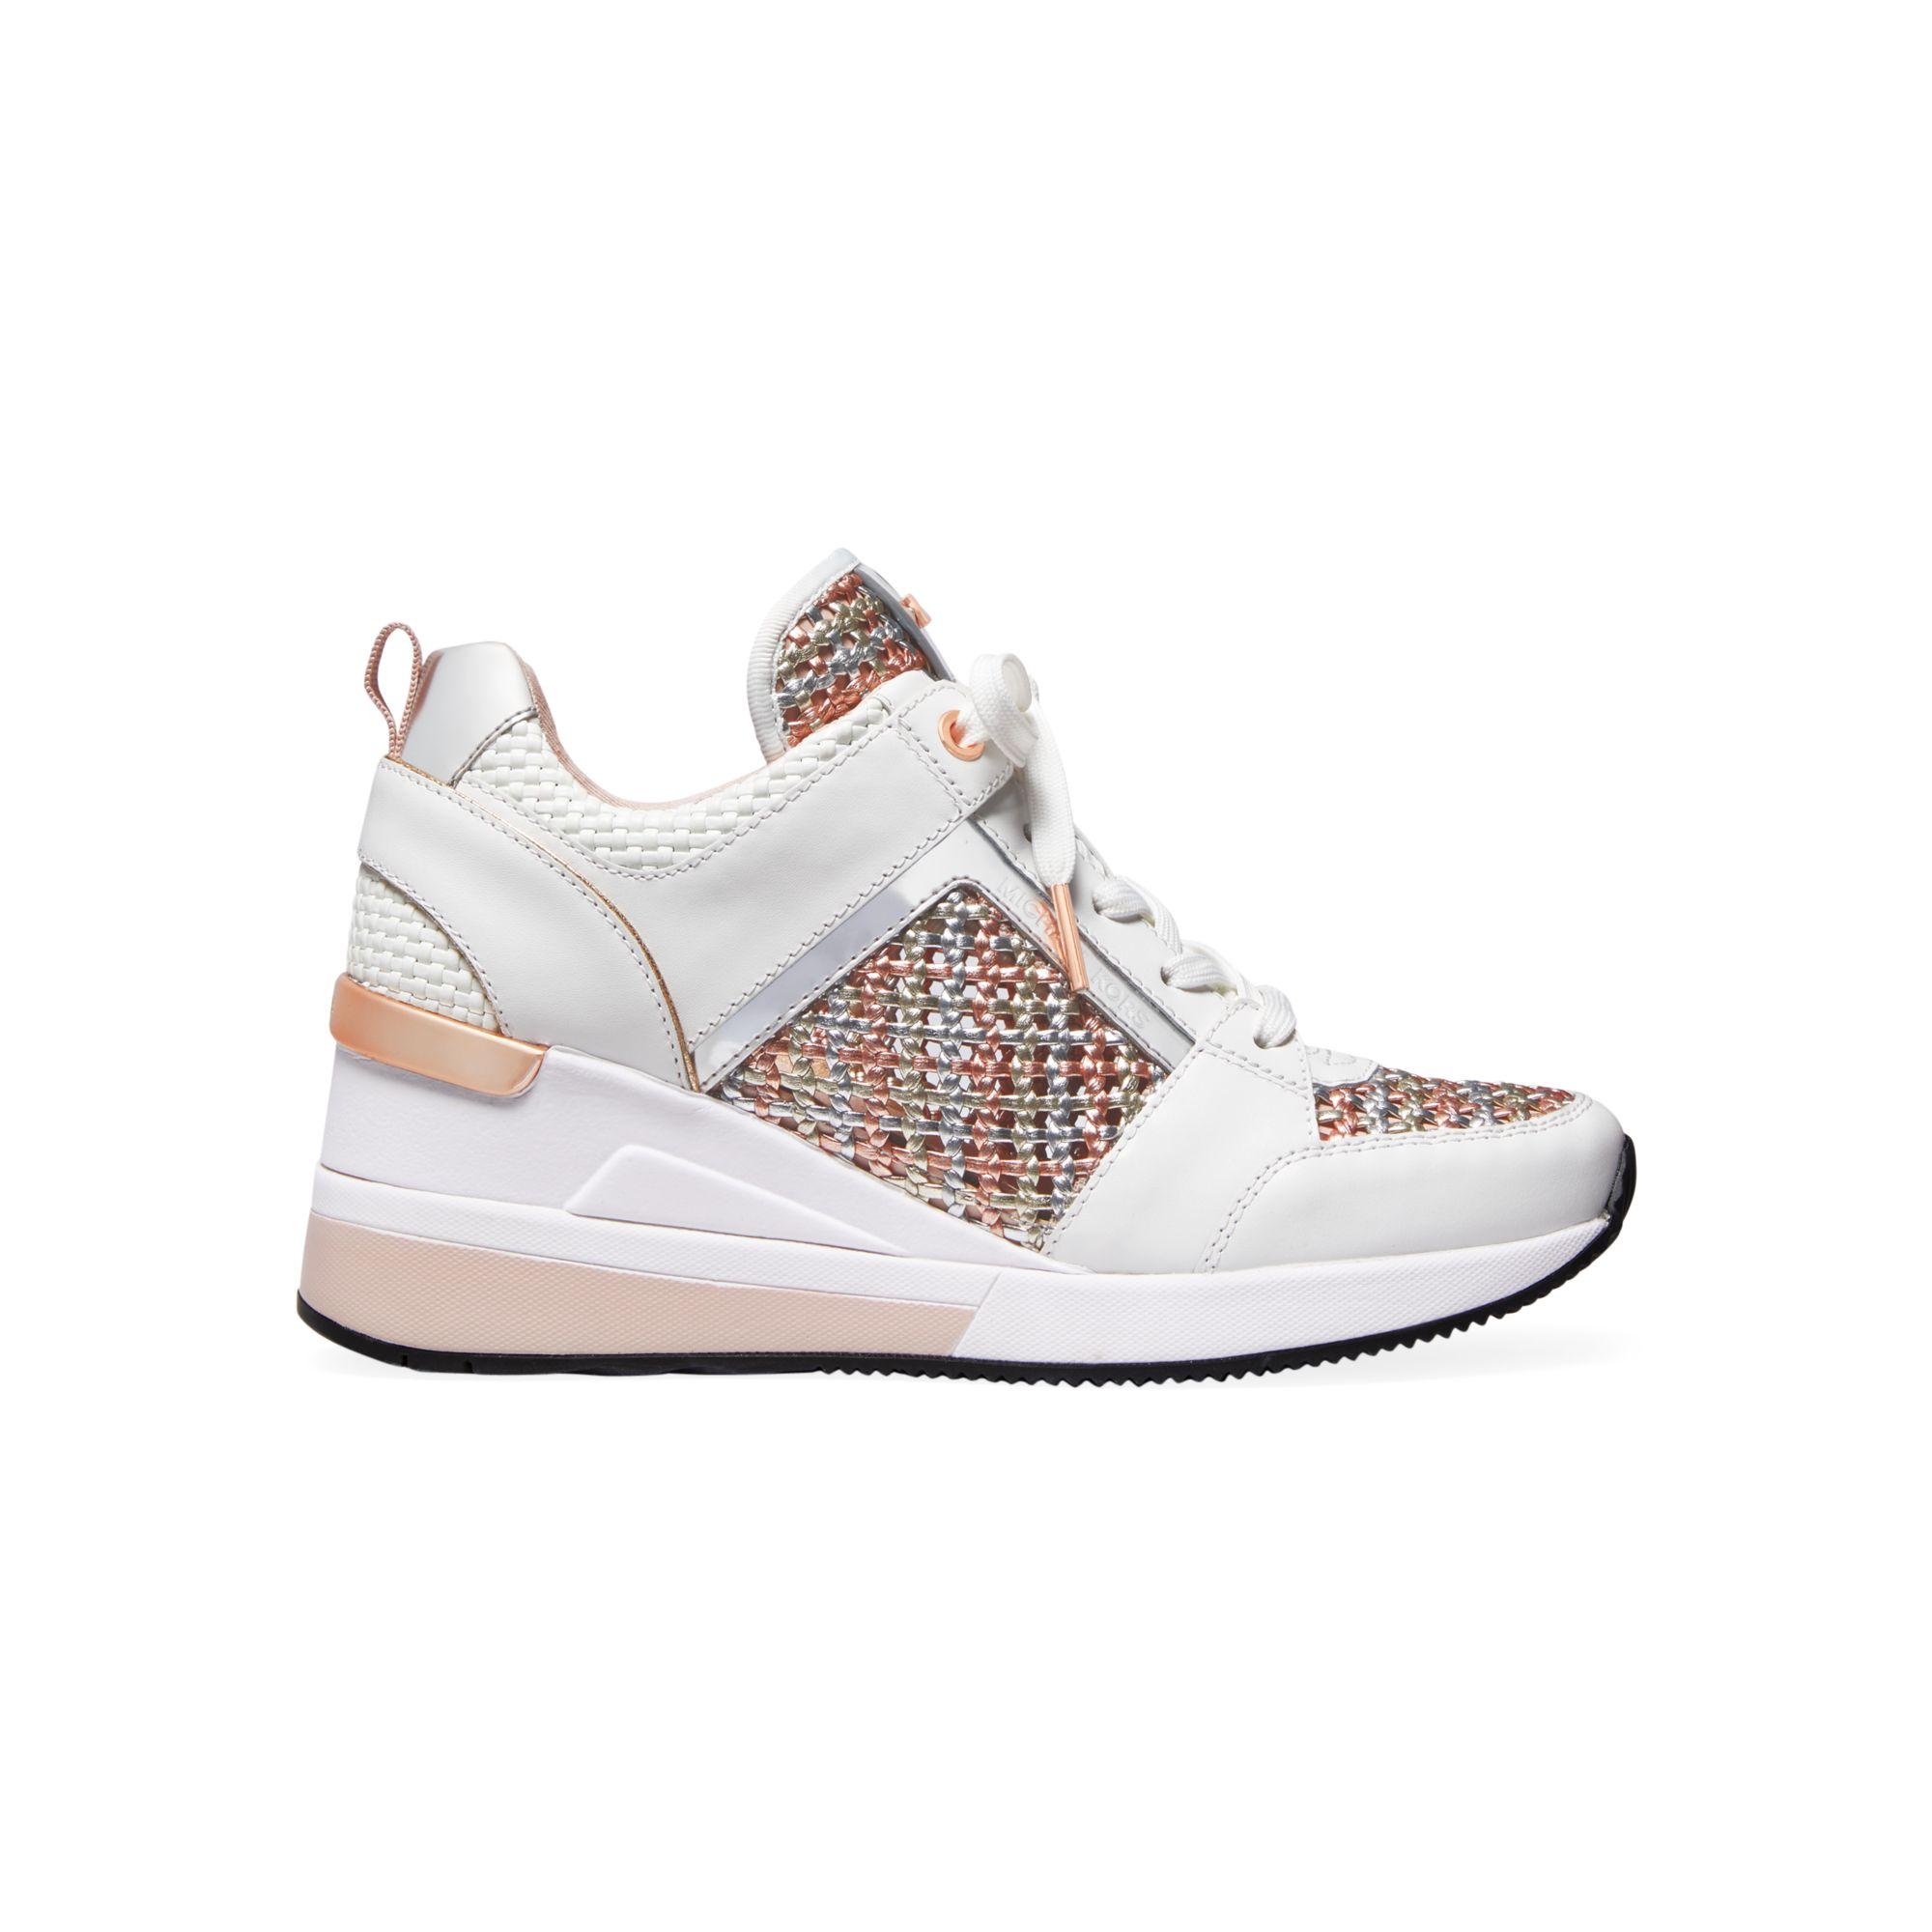 MICHAEL Michael Kors Georgie Metallic Woven Leather Wedge Sneakers in White  Rose Gold (White) - Lyst